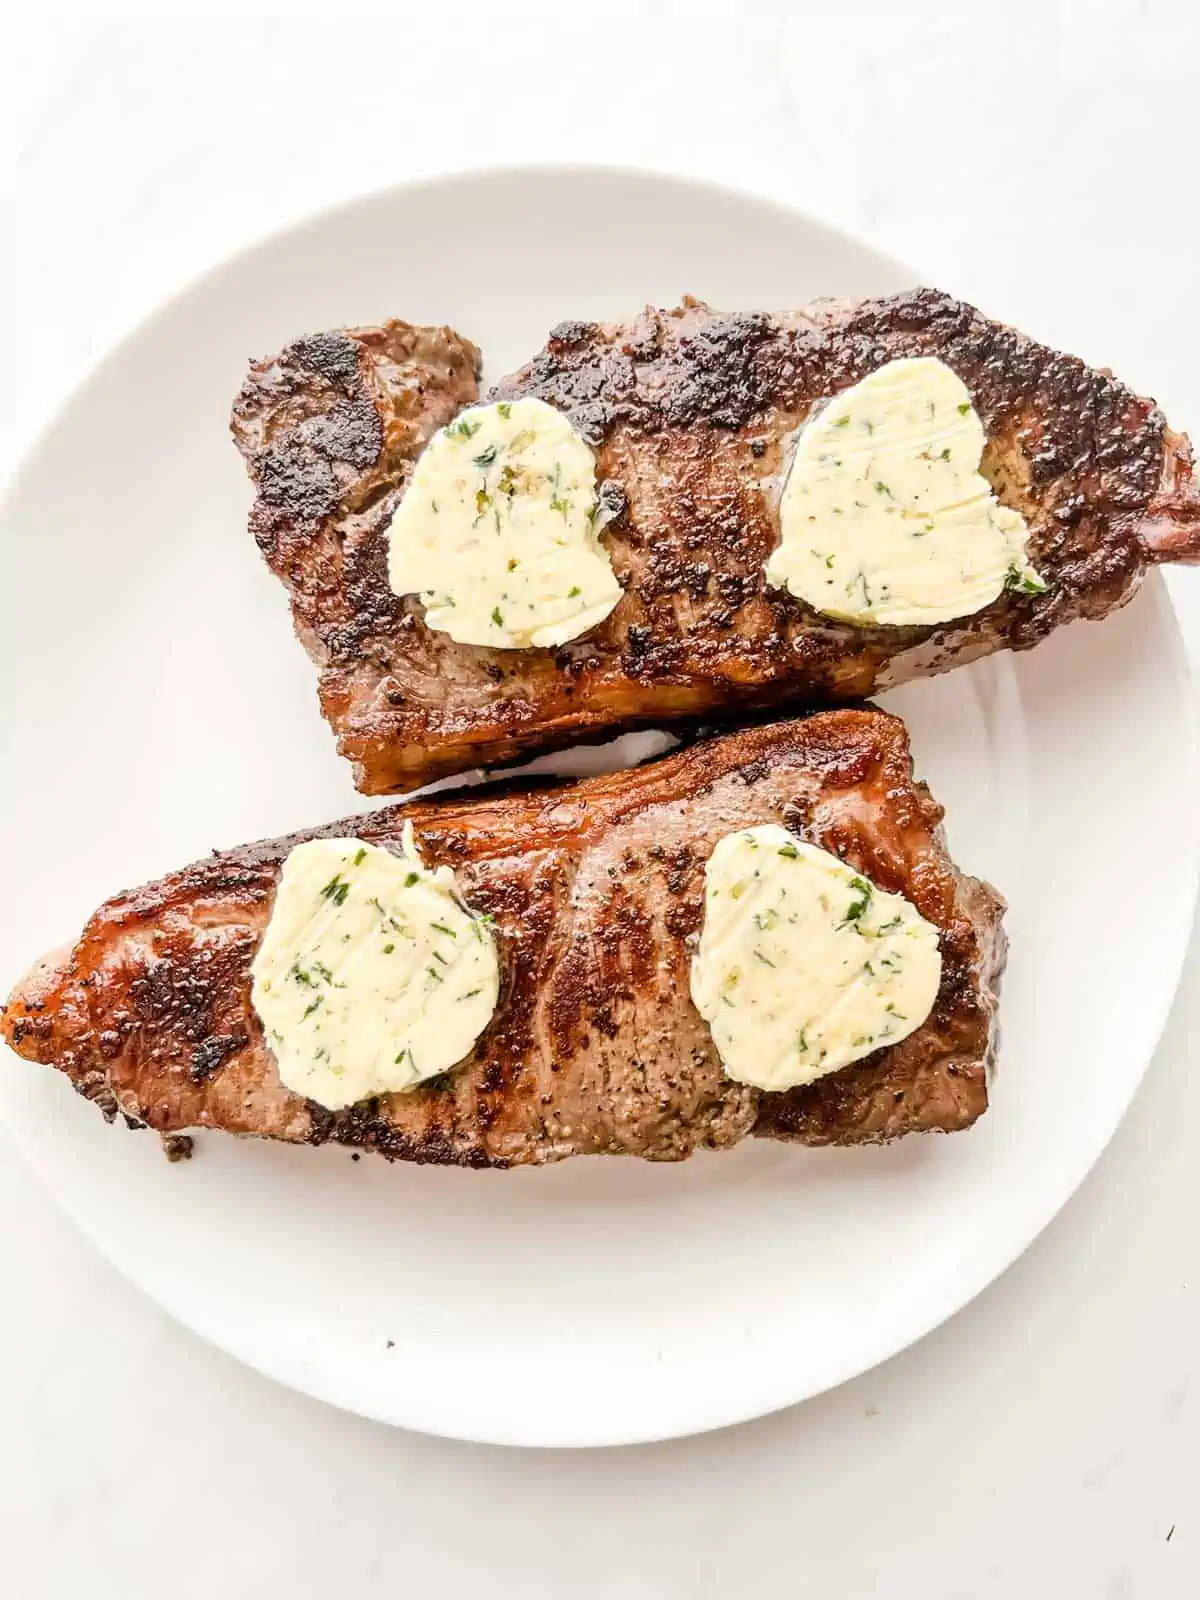 Photo of steaks that have been cooked and have just had compound butter put on top of them.